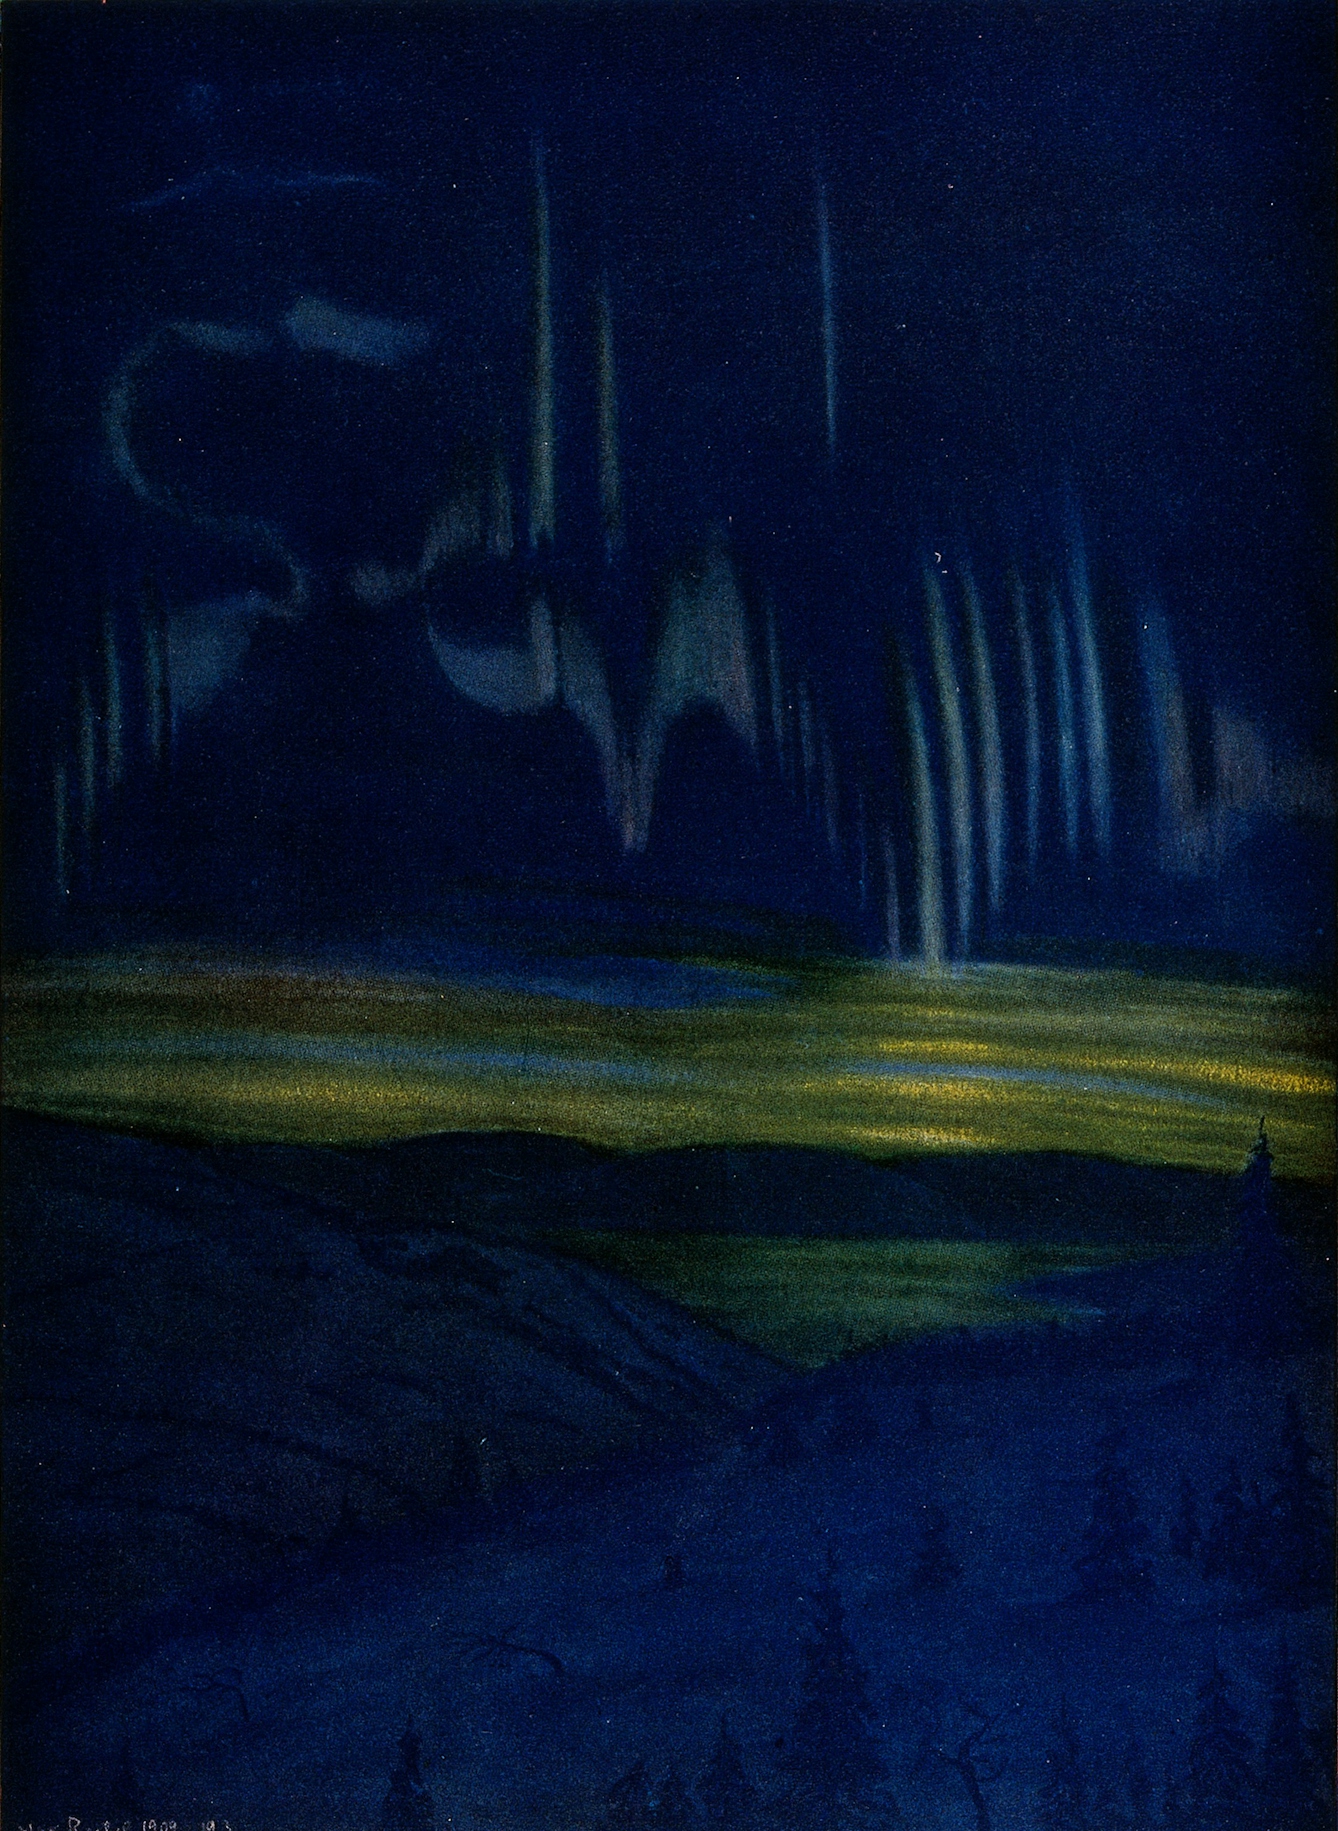 Max Raebel (1874–1946) was a German composer, painter and polar explorer who made many paintings of the Northern Lights.